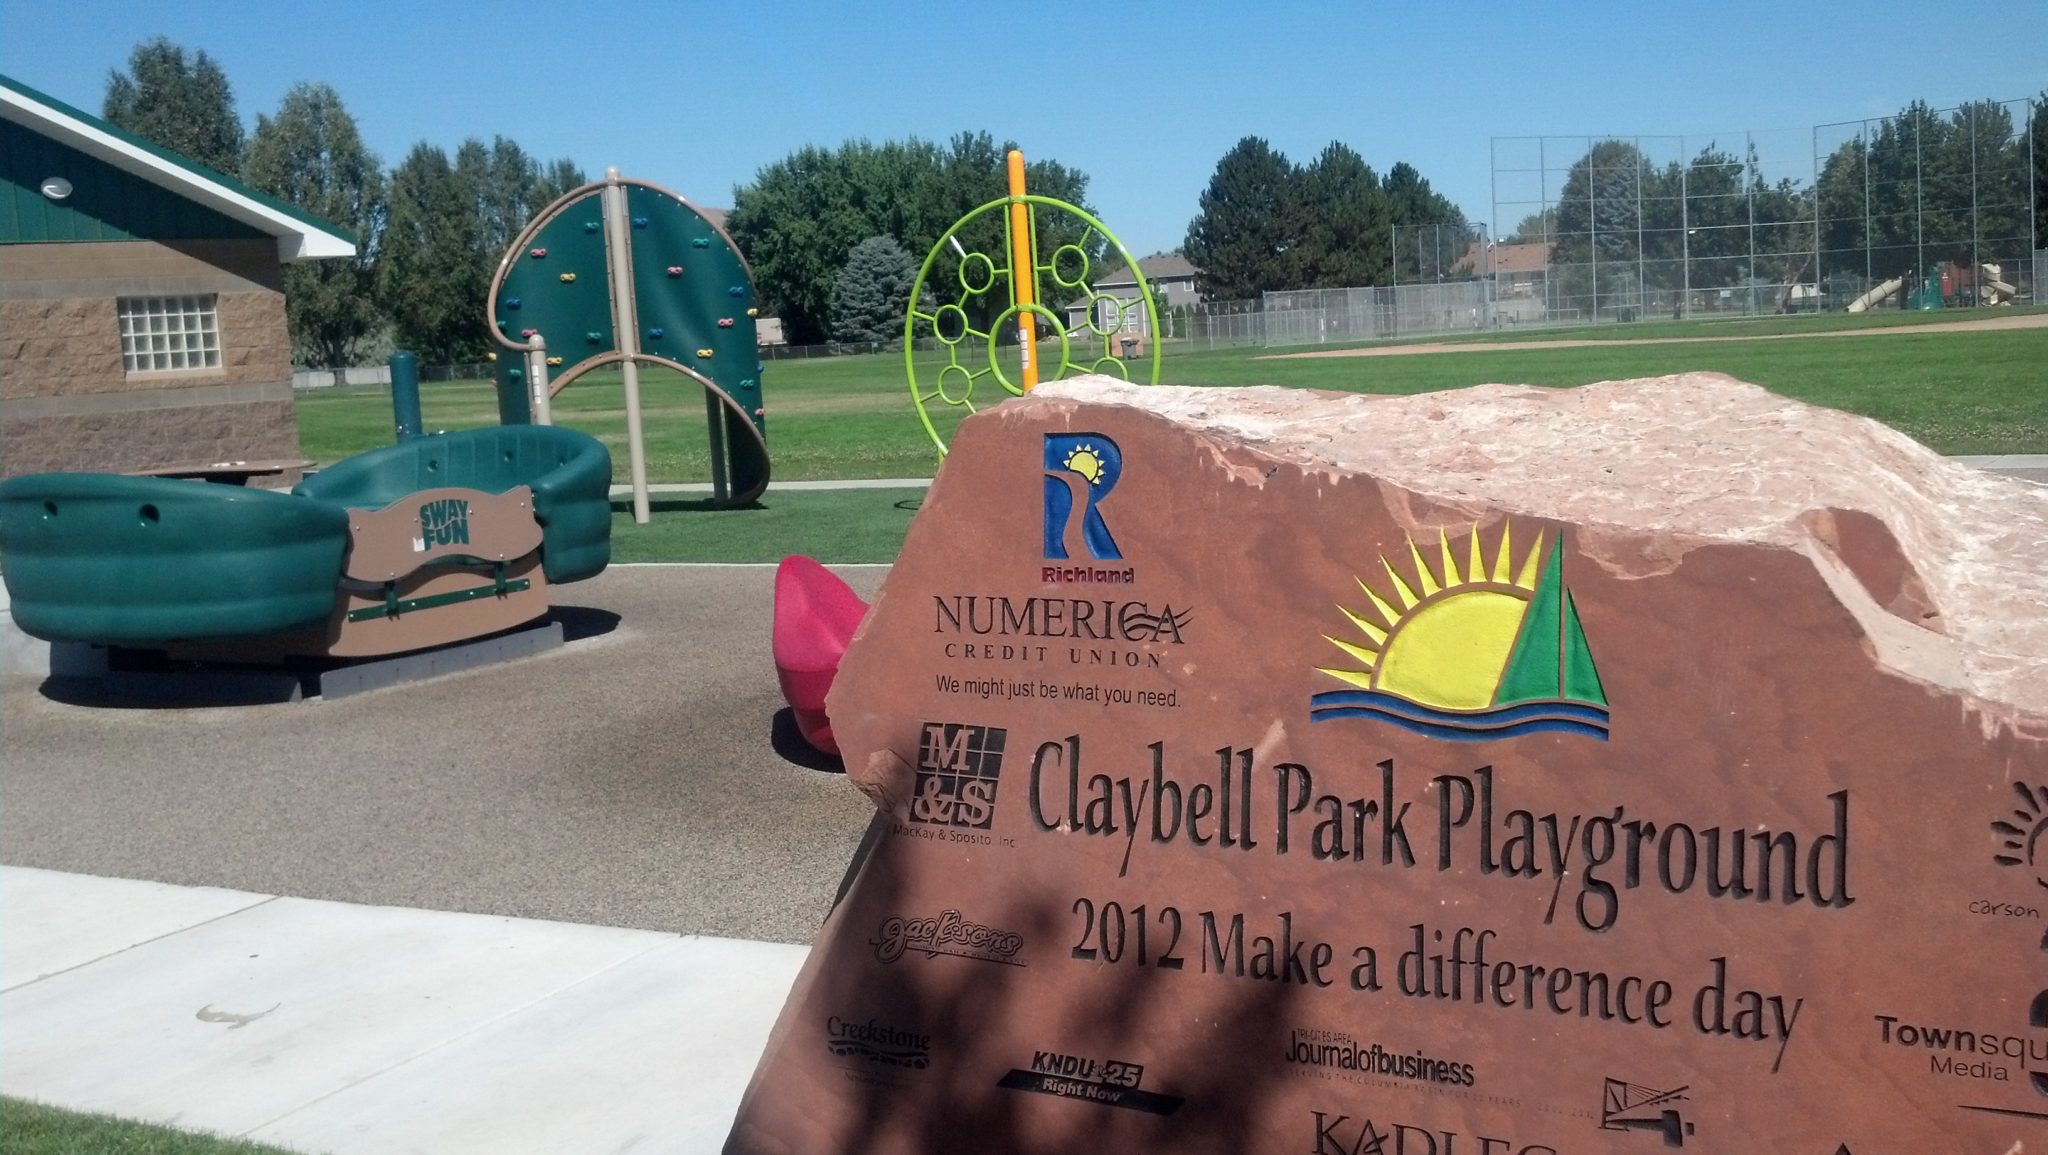 Claybell Park